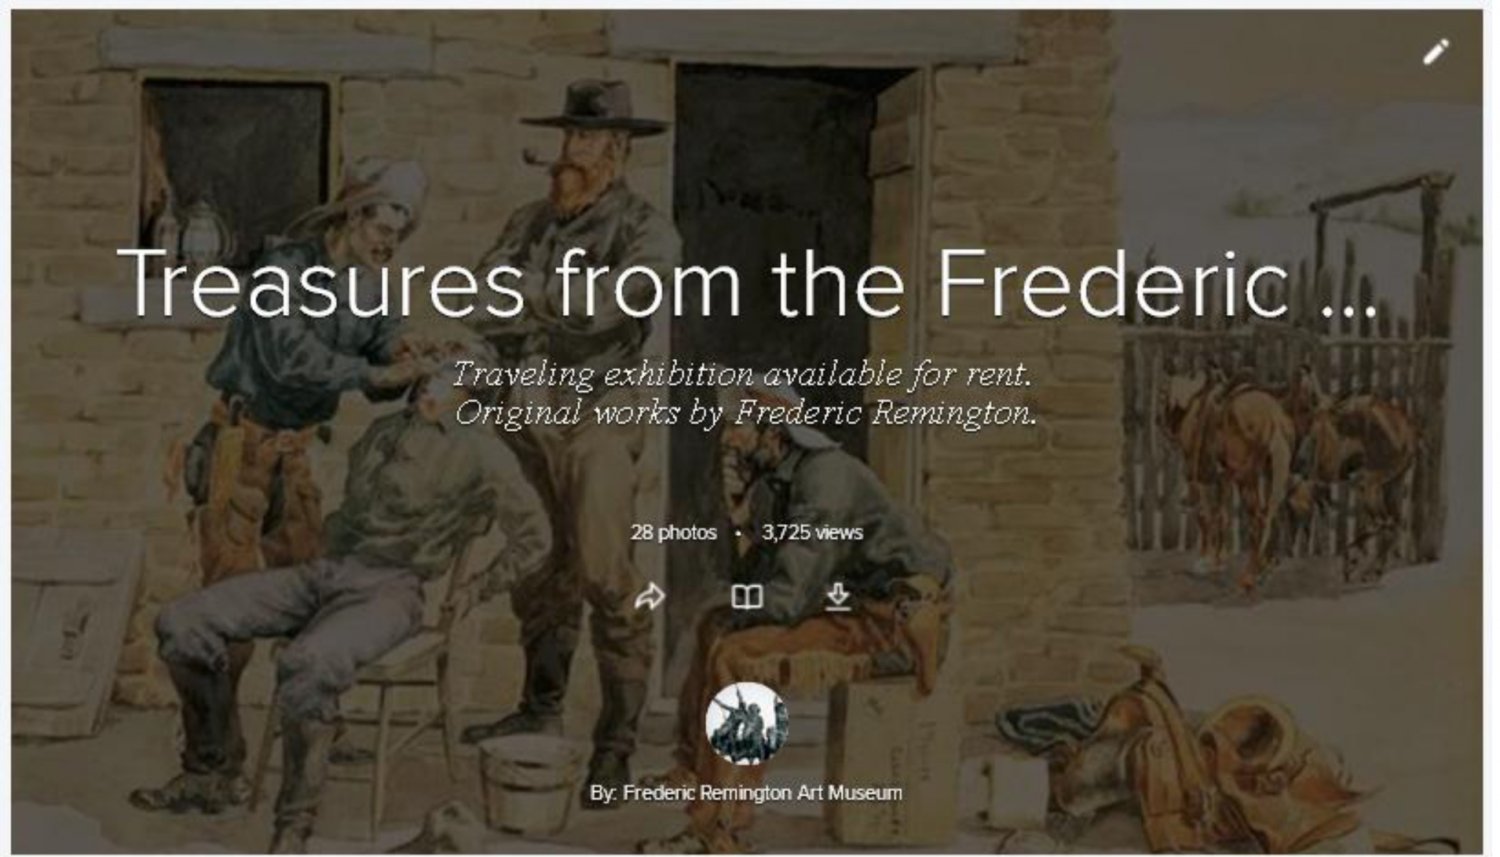 Treasures from the Frederic Remington Art Museum